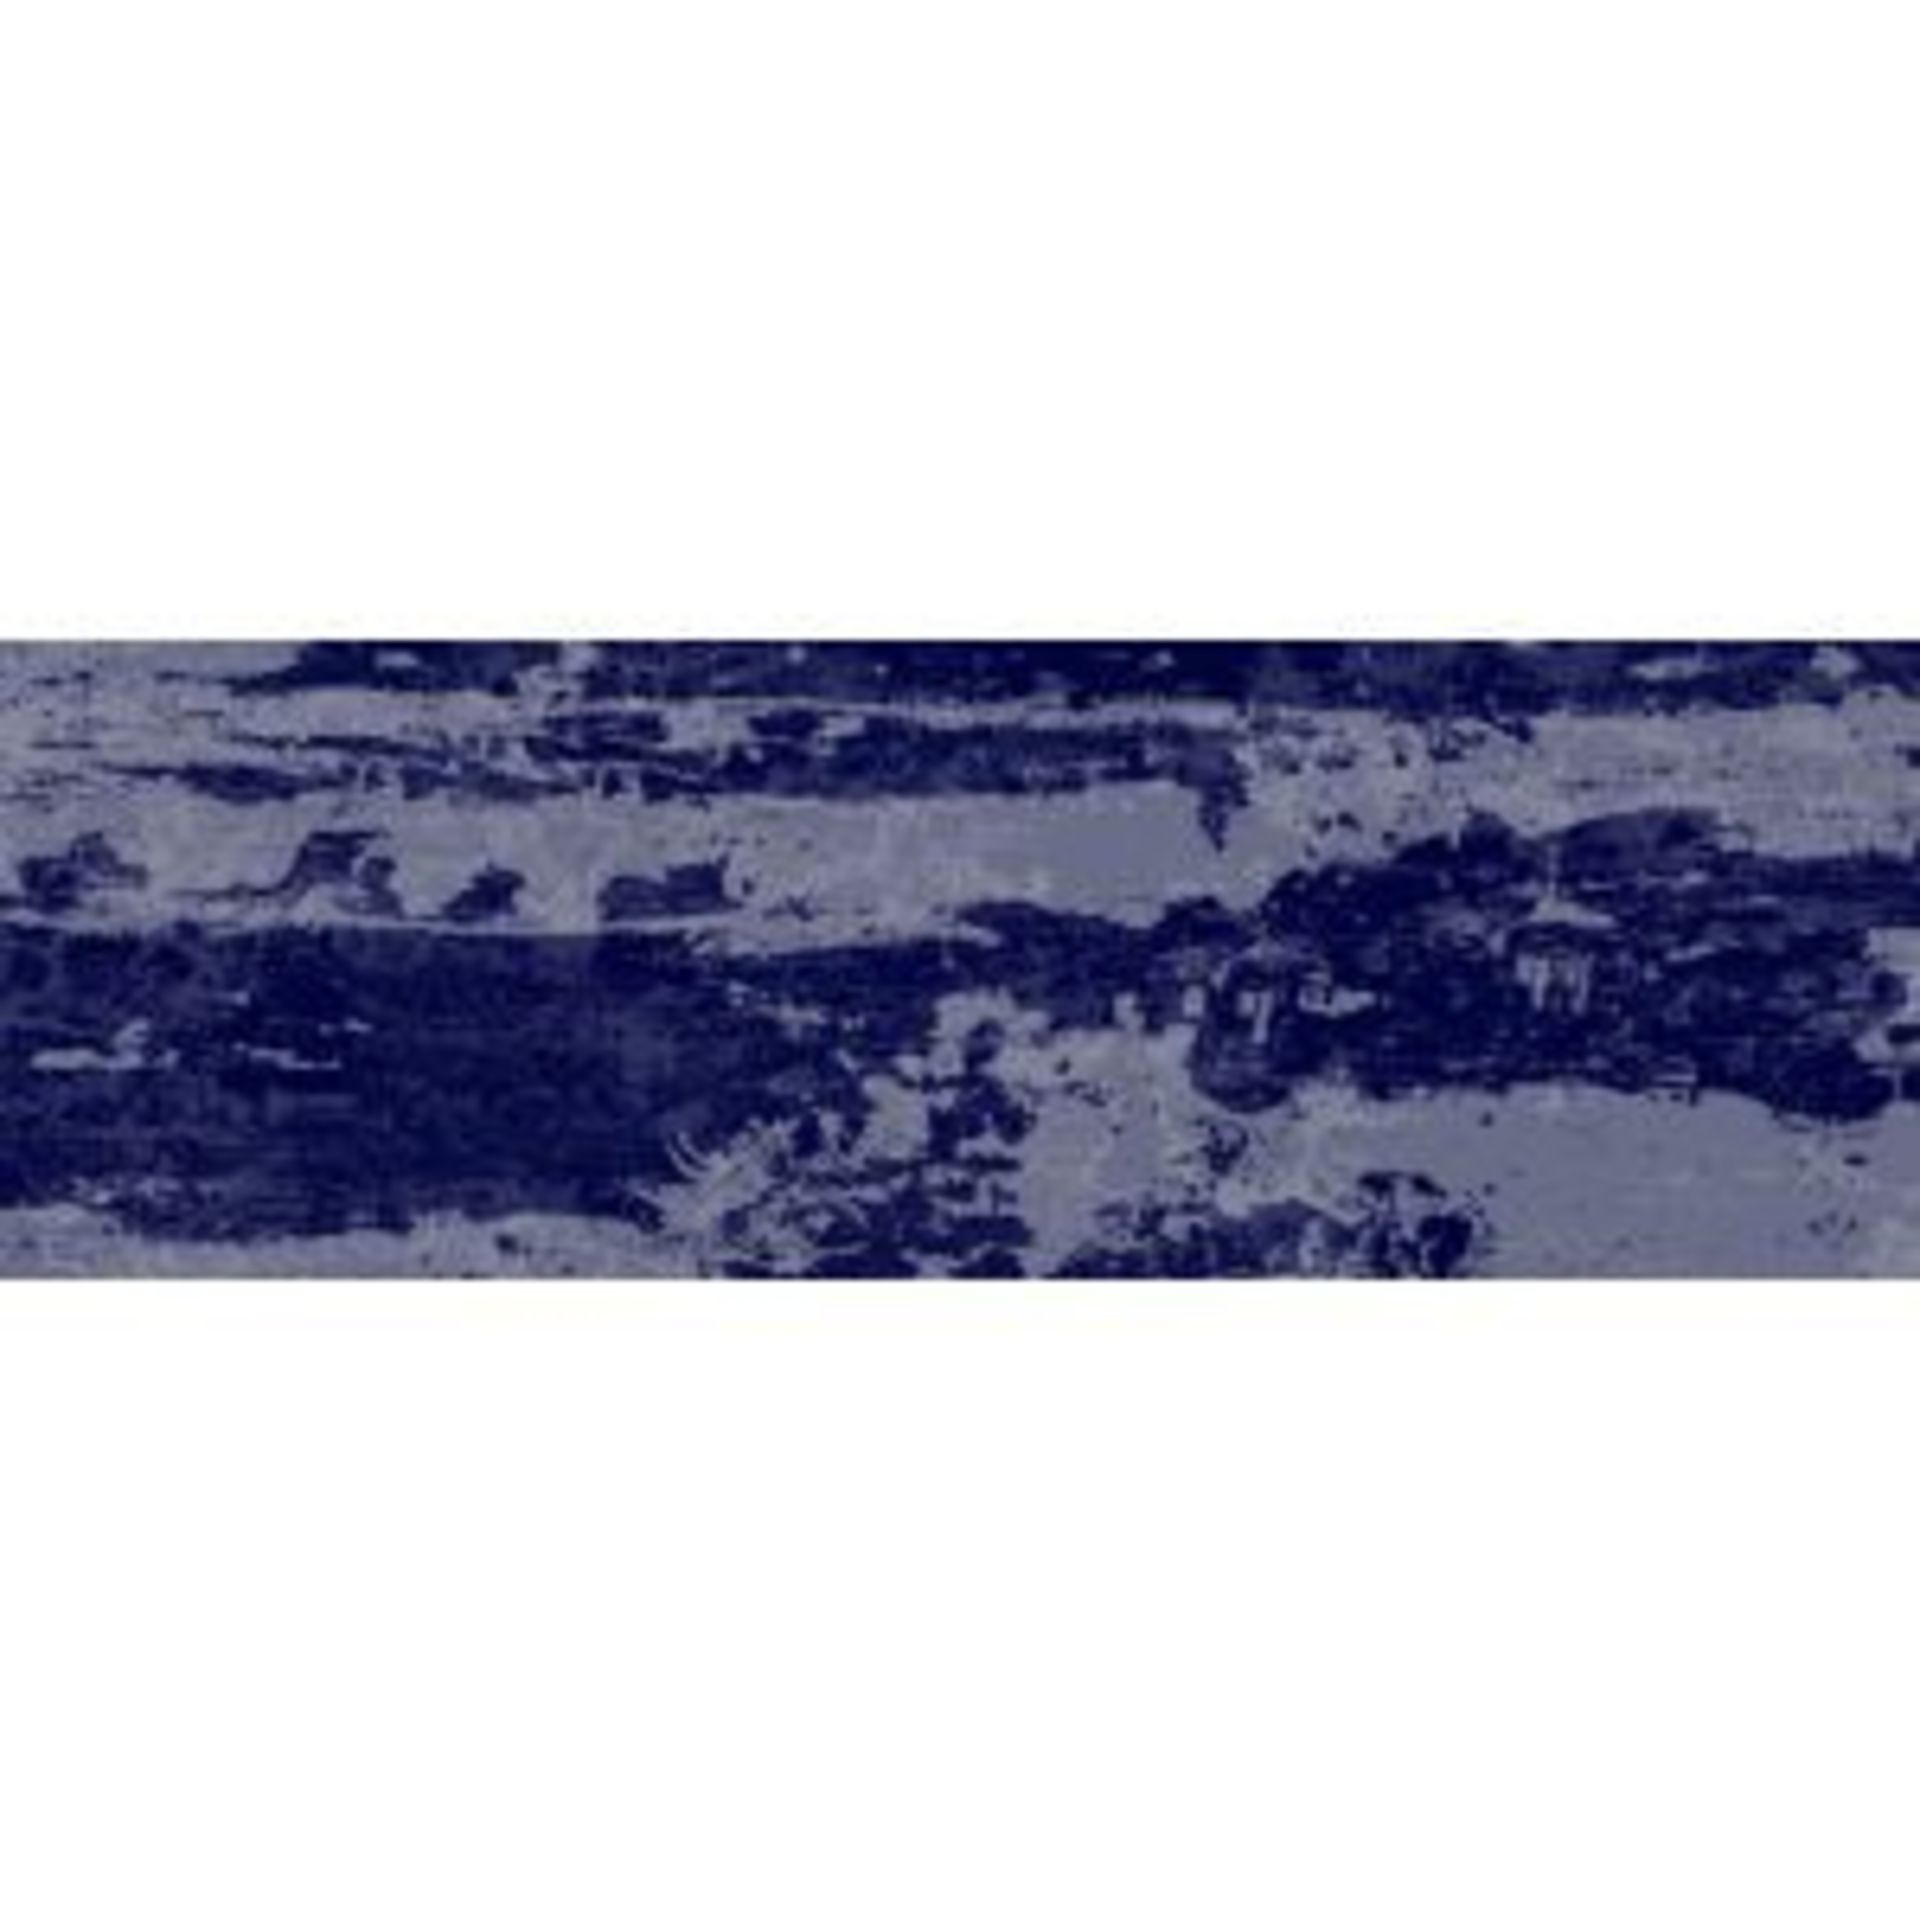 5.1m2 Aura Indigo Satin Ceramic Wall tile, (L)300mm (W)100mm PER TILE. This wall tile is ideal ... - Image 2 of 2